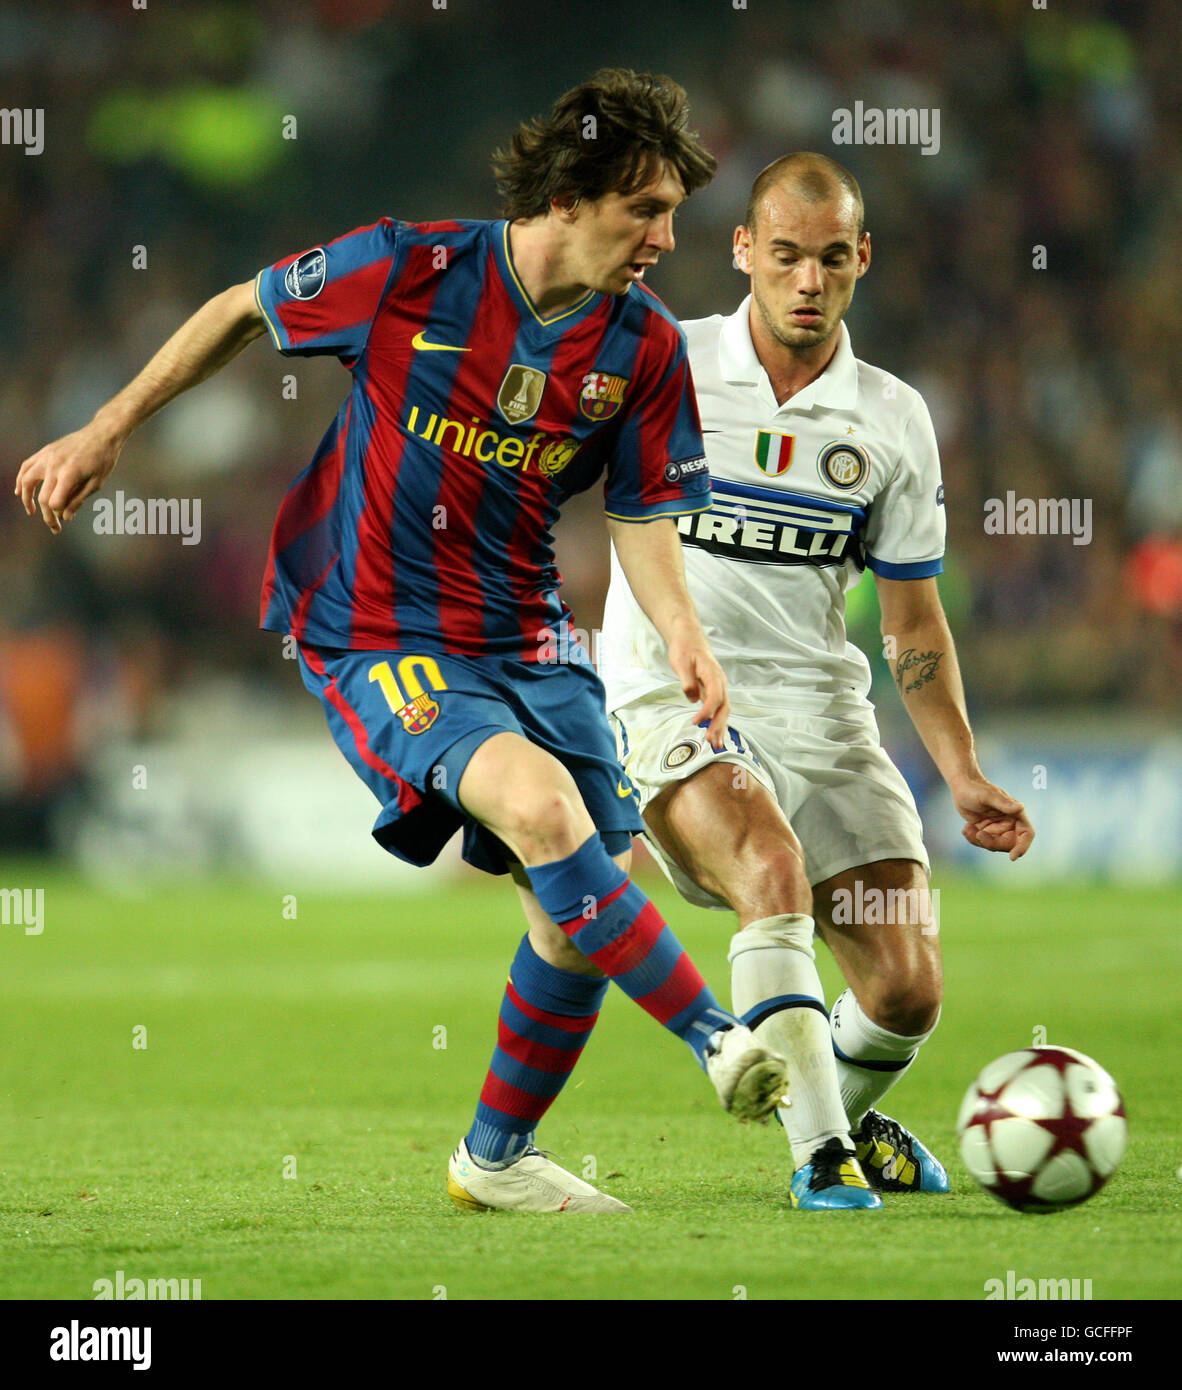 Barcelona's Lionel Messi and Inter Milan's Wesley Sneijder compete for the ball Stock Photo